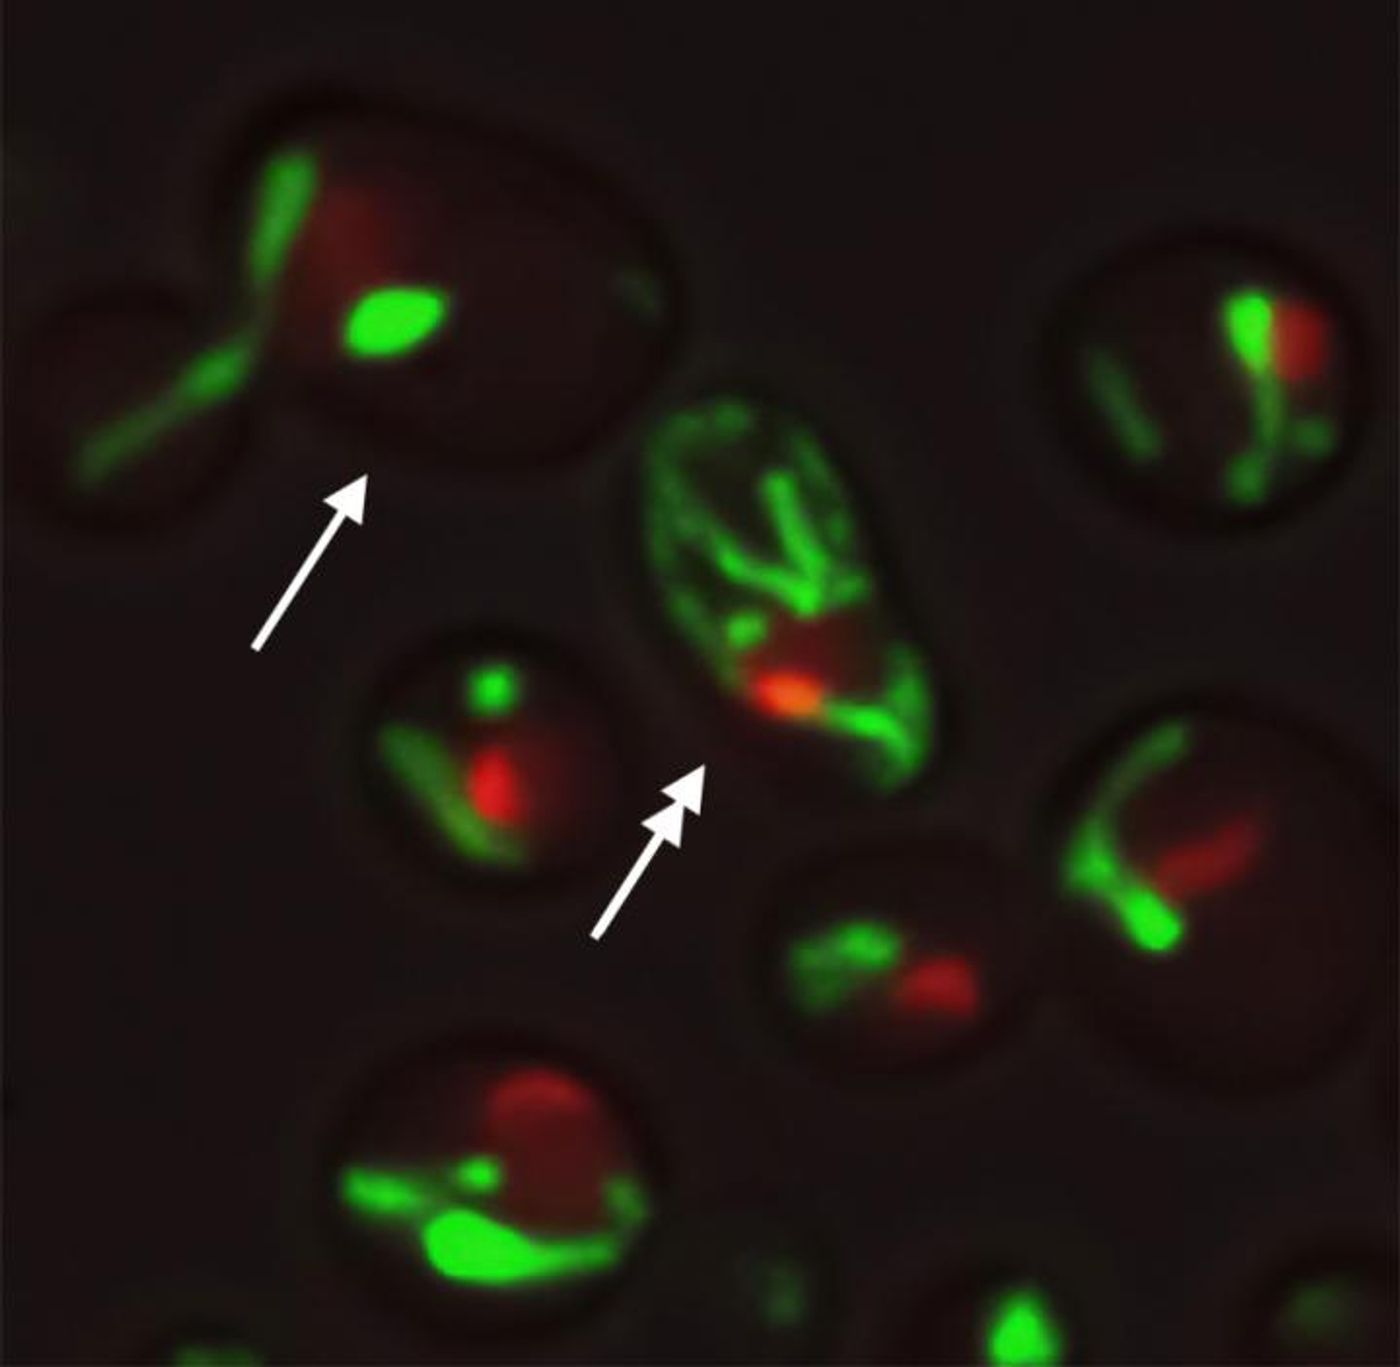 Yeast cells with the same DNA under the same environment show different structures of mitochondria (green) and nucleolus (red), which may underlie the causes of different aging paths. Single and double arrowheads point to two cells with distinct mitochondrial and nucleolar morphologies. / Credit: Hao Lab, UC San Diego